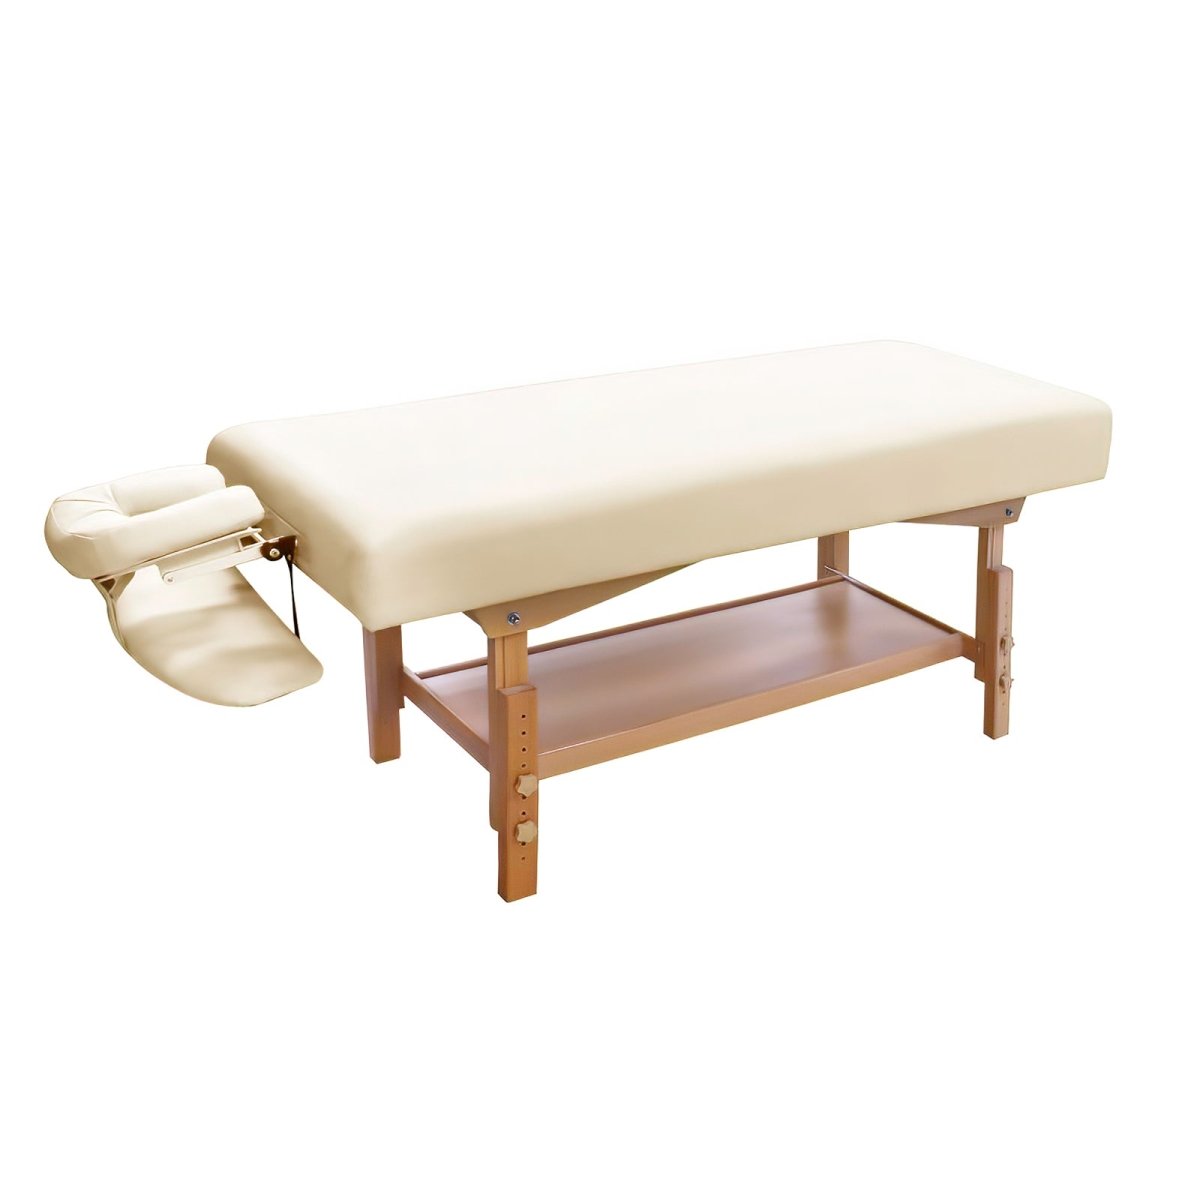 Ultra Stable Adjustable Height Stationary Massage Table - GreenLife-Stationary Massage Table